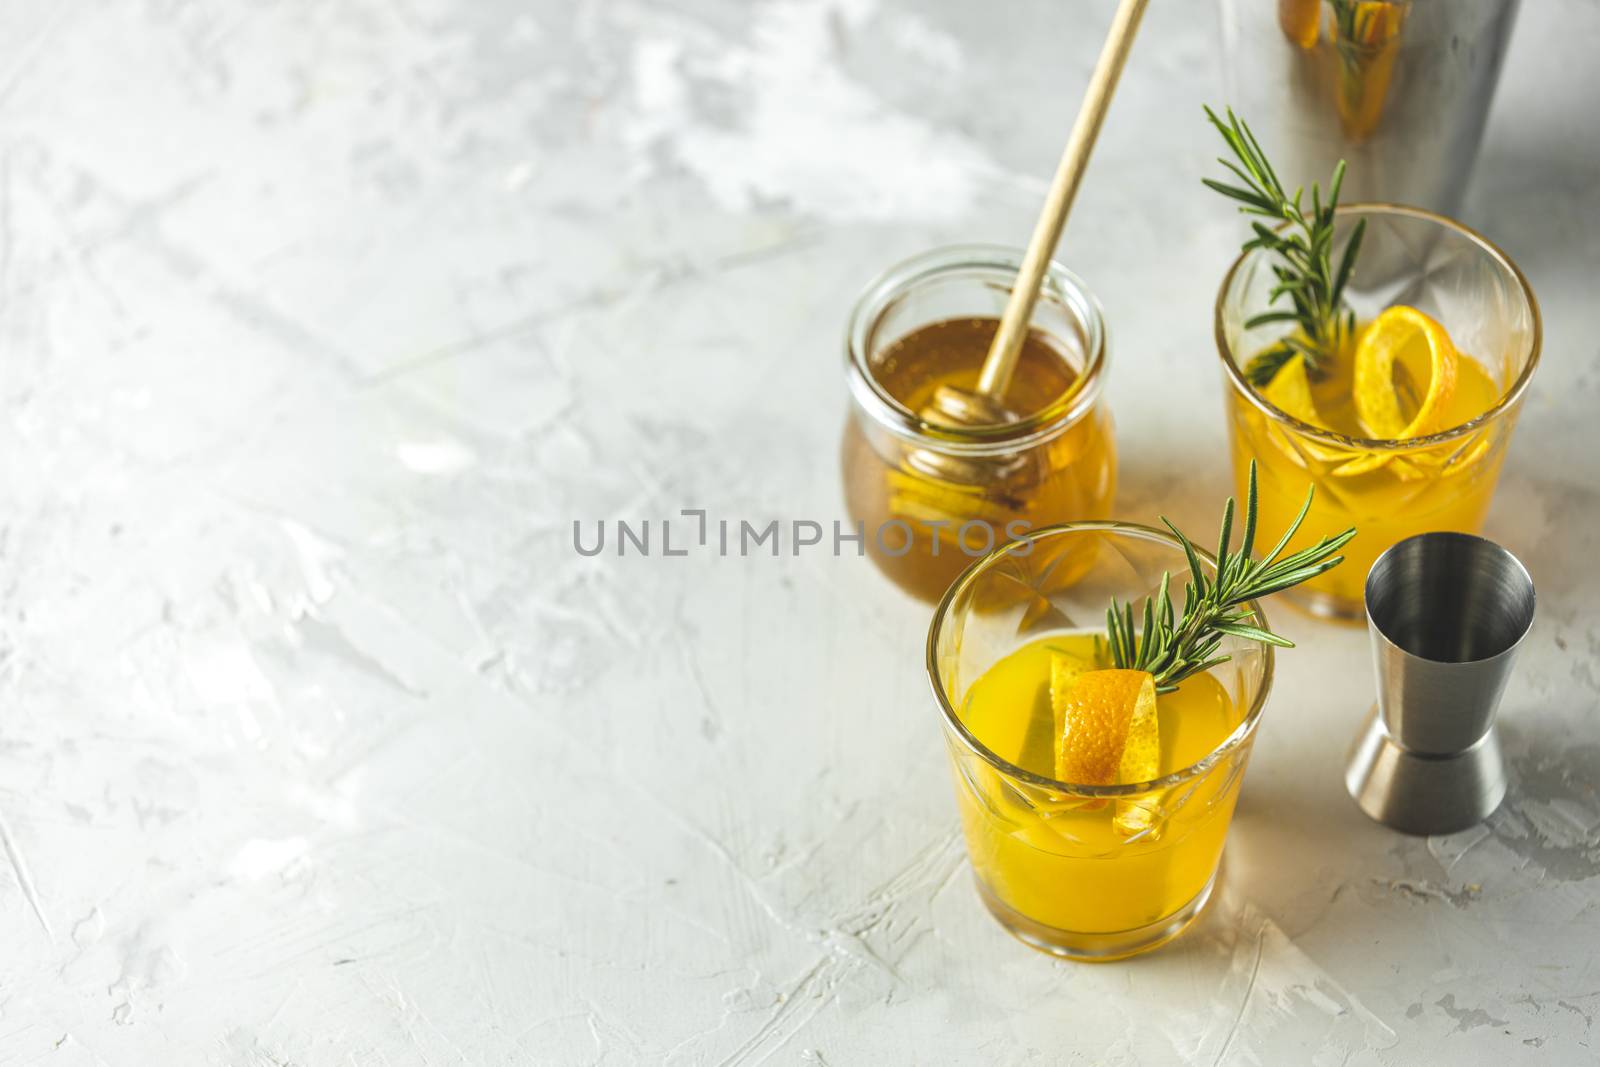 Honey bourbon cocktail with rosemary simple syrup or homemade wh by ArtSvitlyna